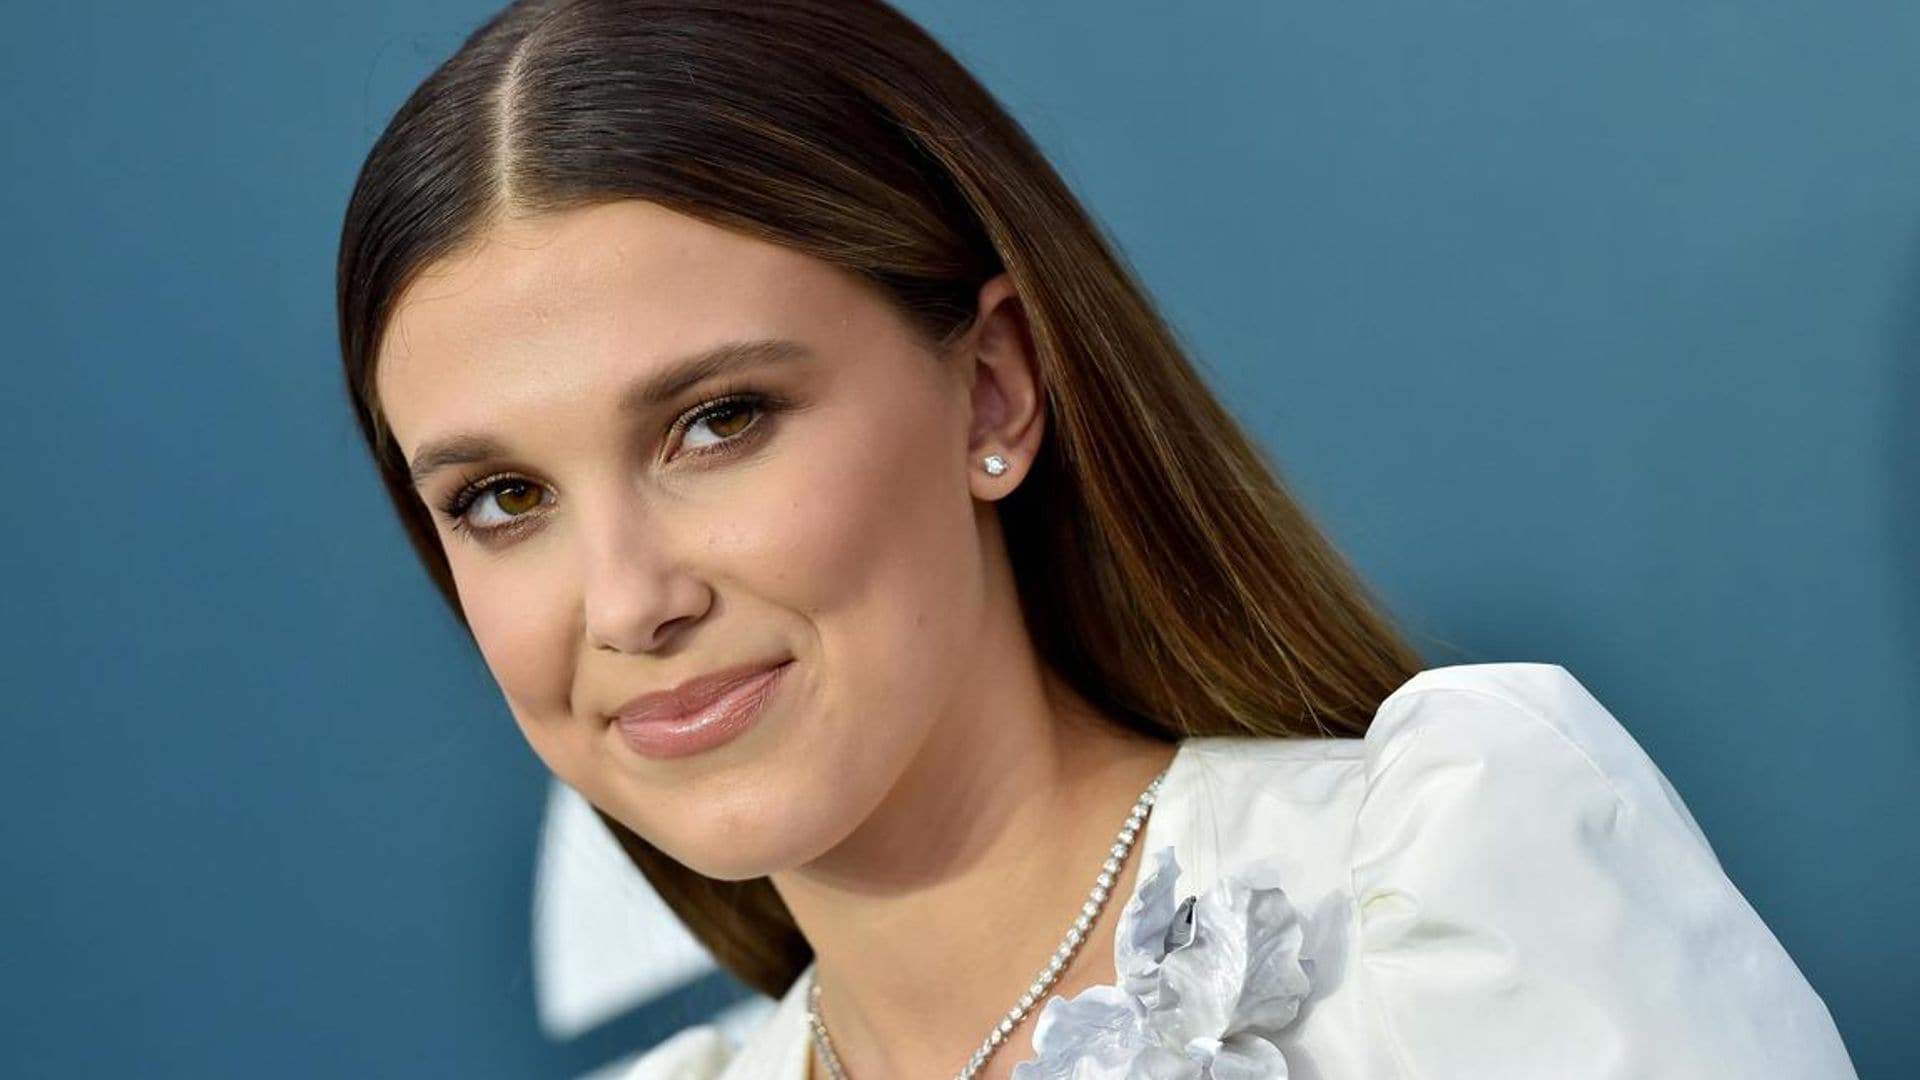 Millie Bobby Brown’s new hair transformation makes her look all grown up